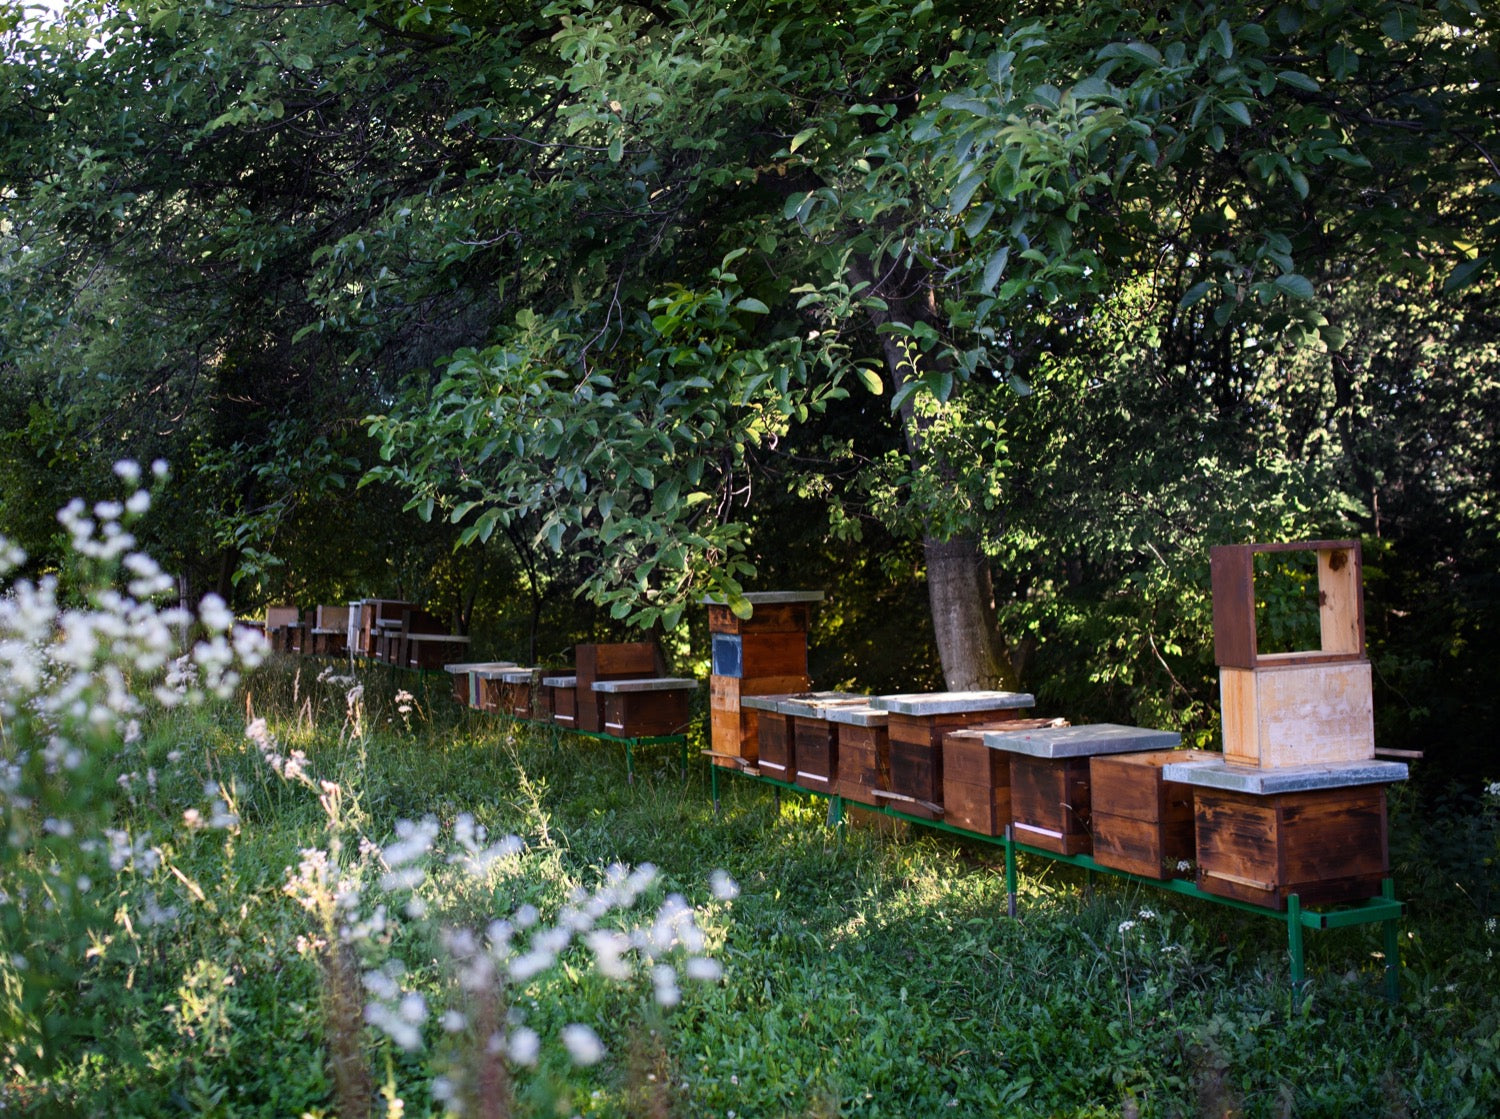 Wooden beehives under trees in an apiary.